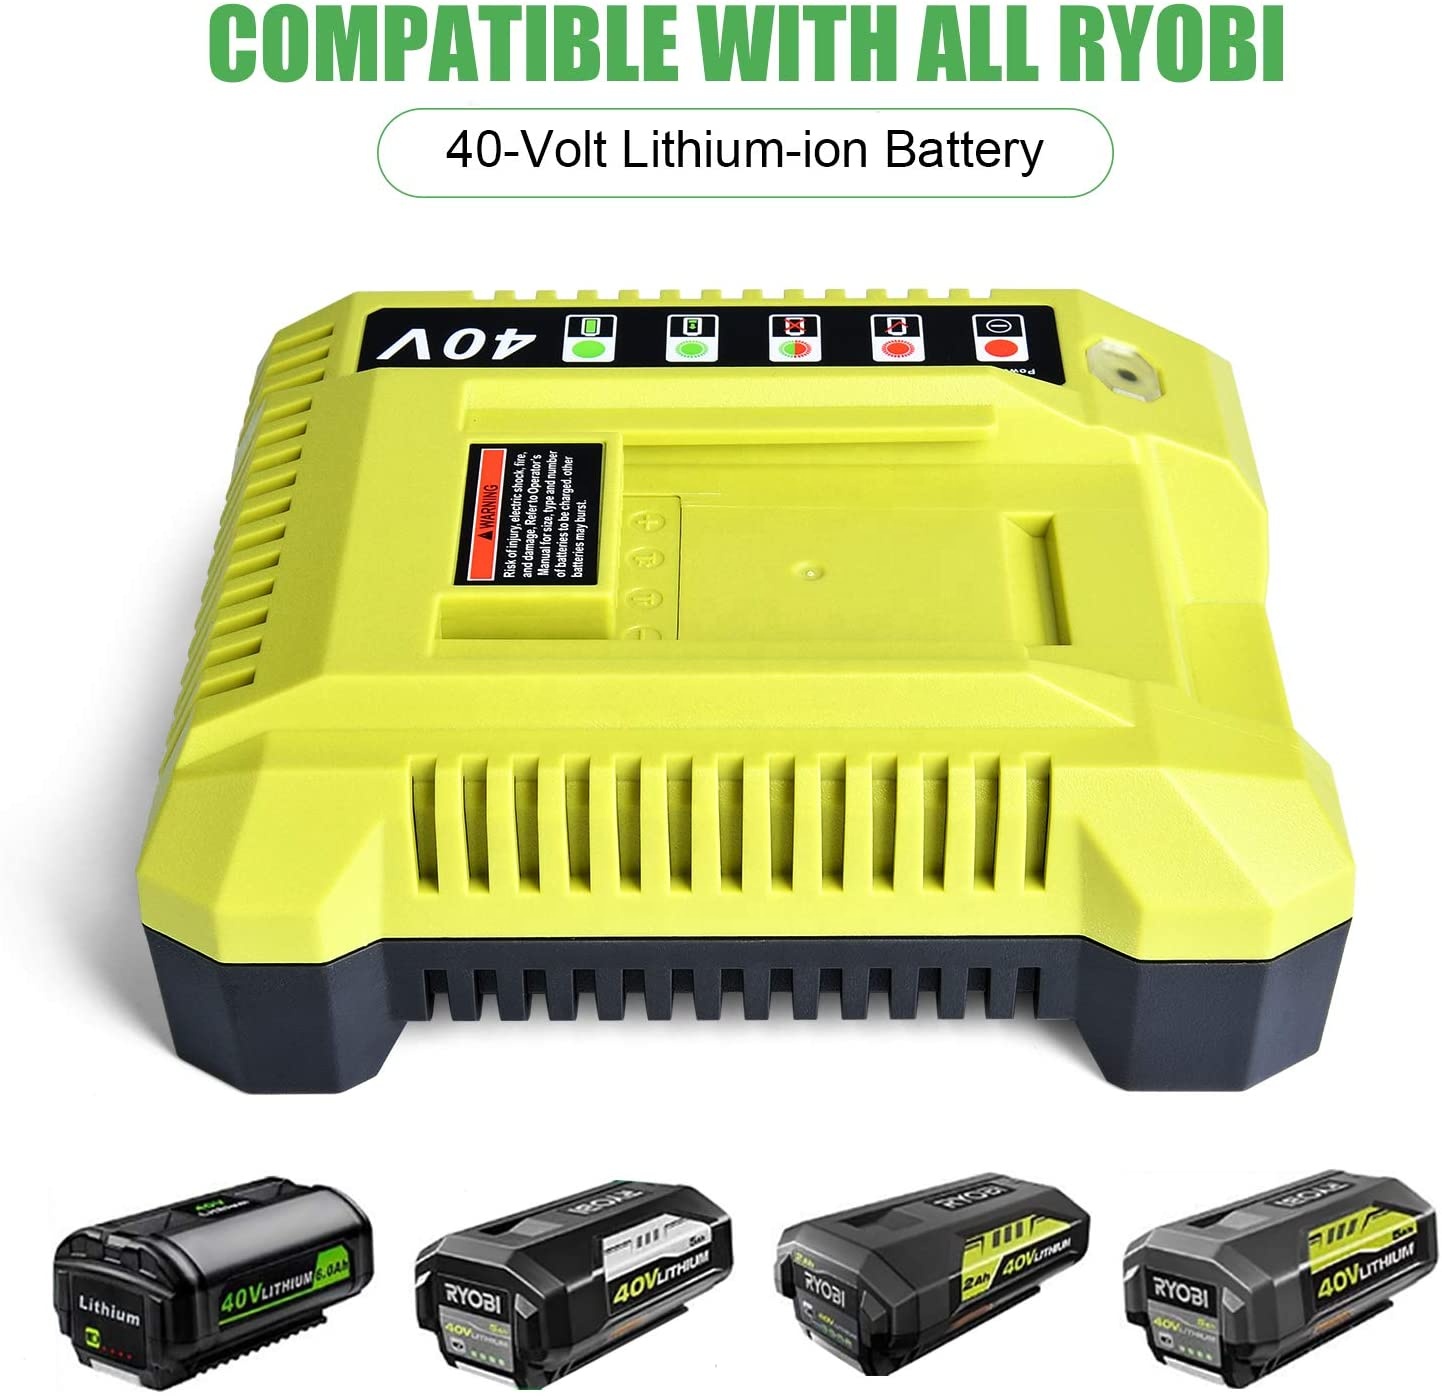 how to charge foy ryobi 40v battery charger OP401 40V 6.0Ah